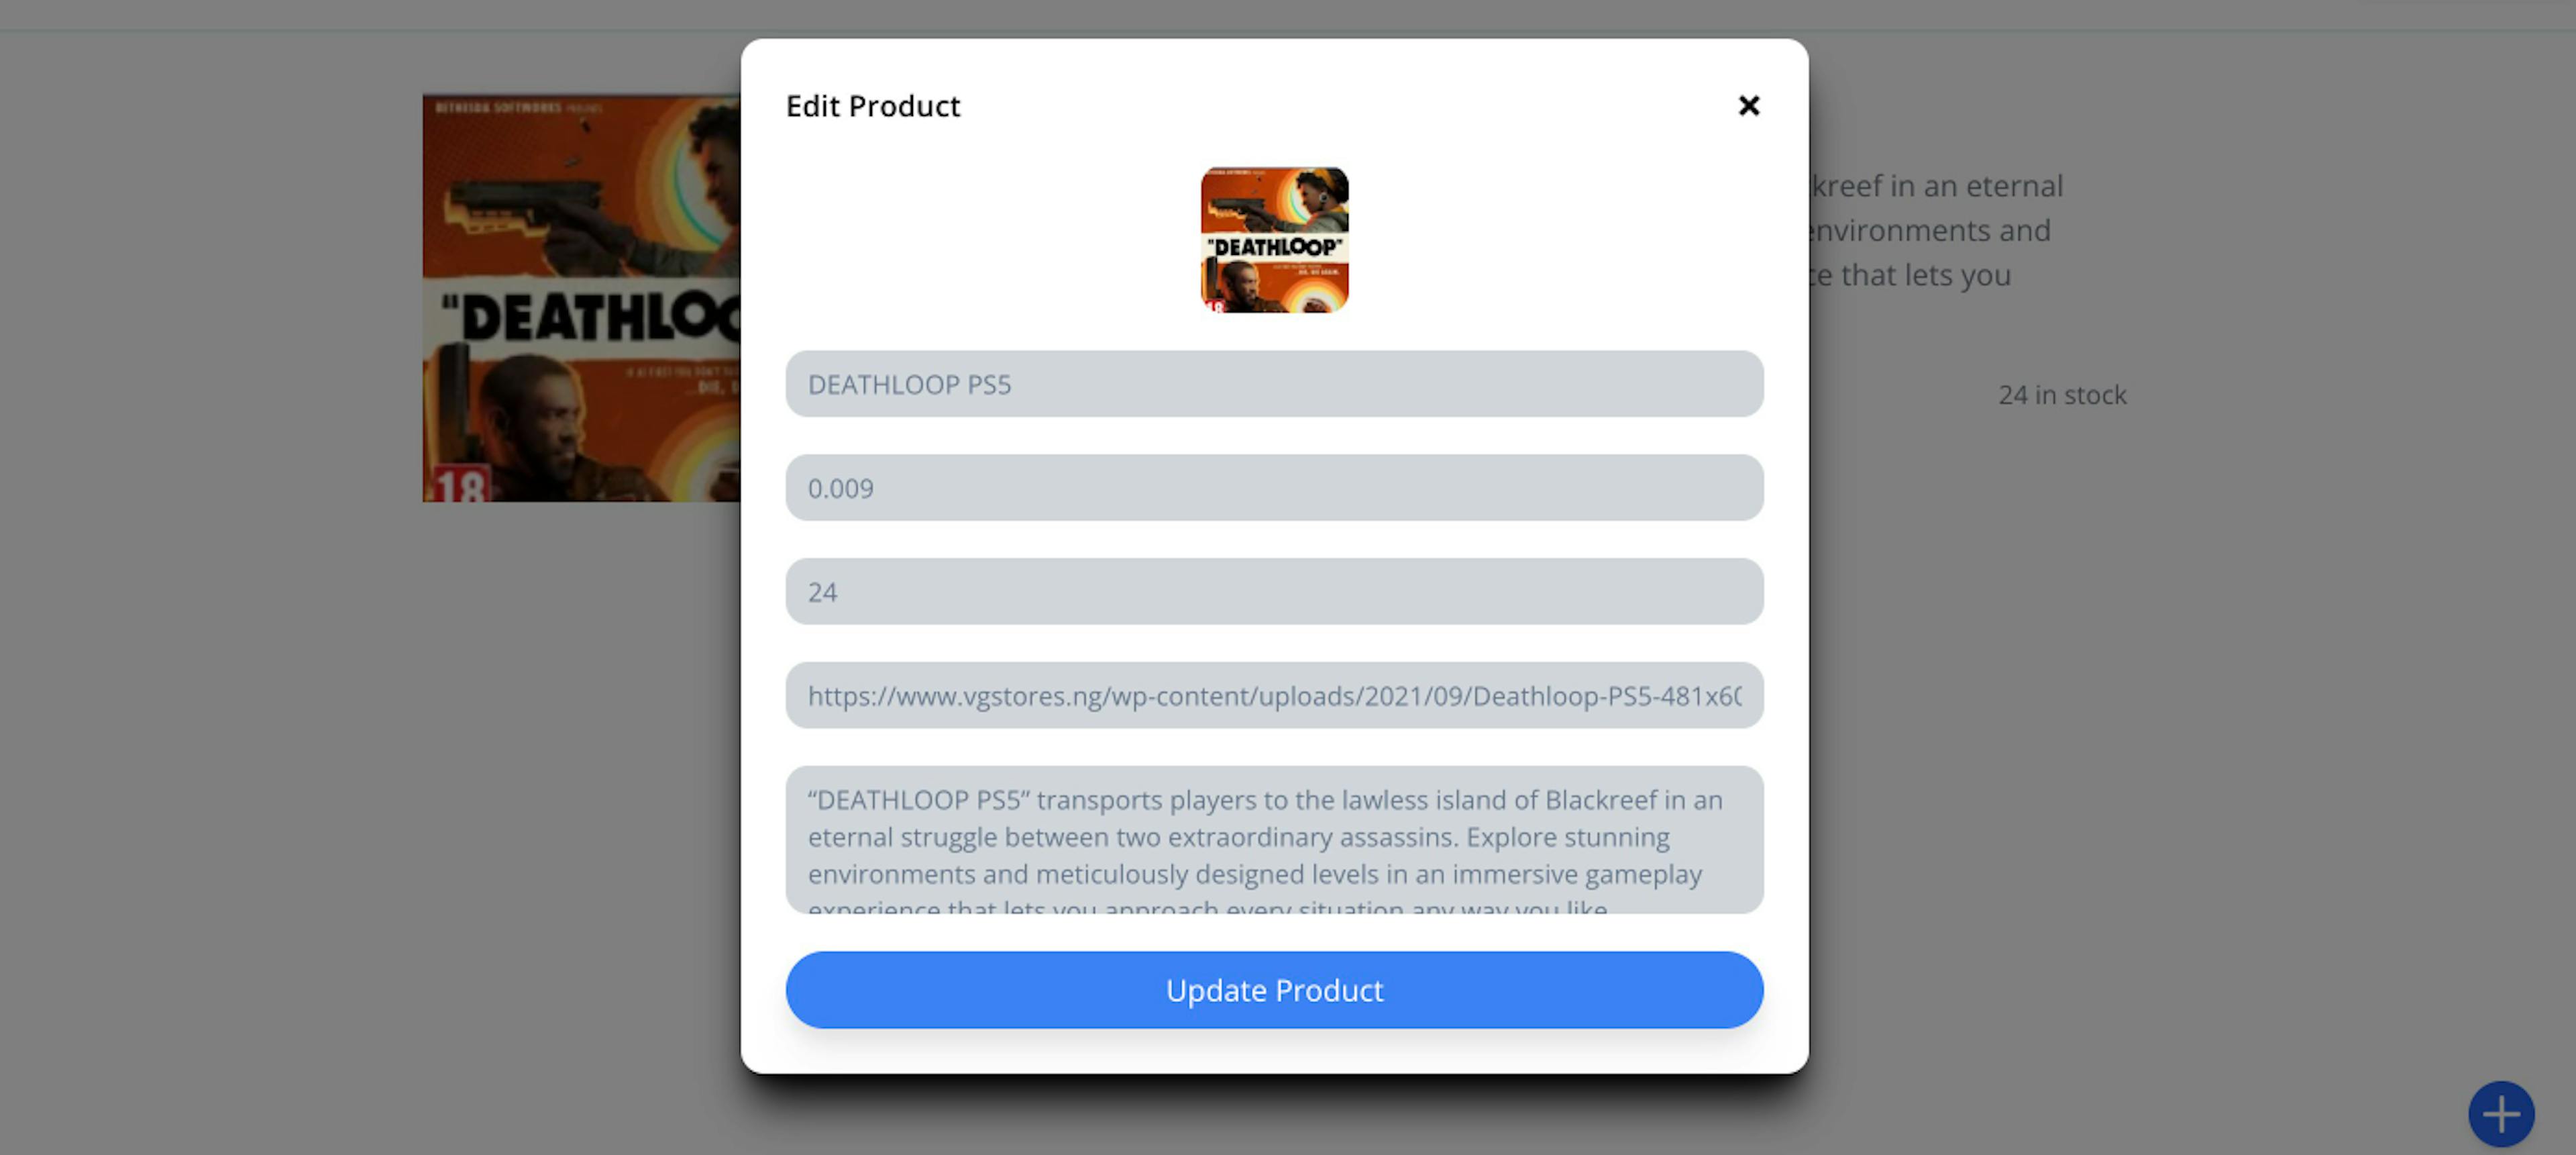 Launched by the Edit Product Button